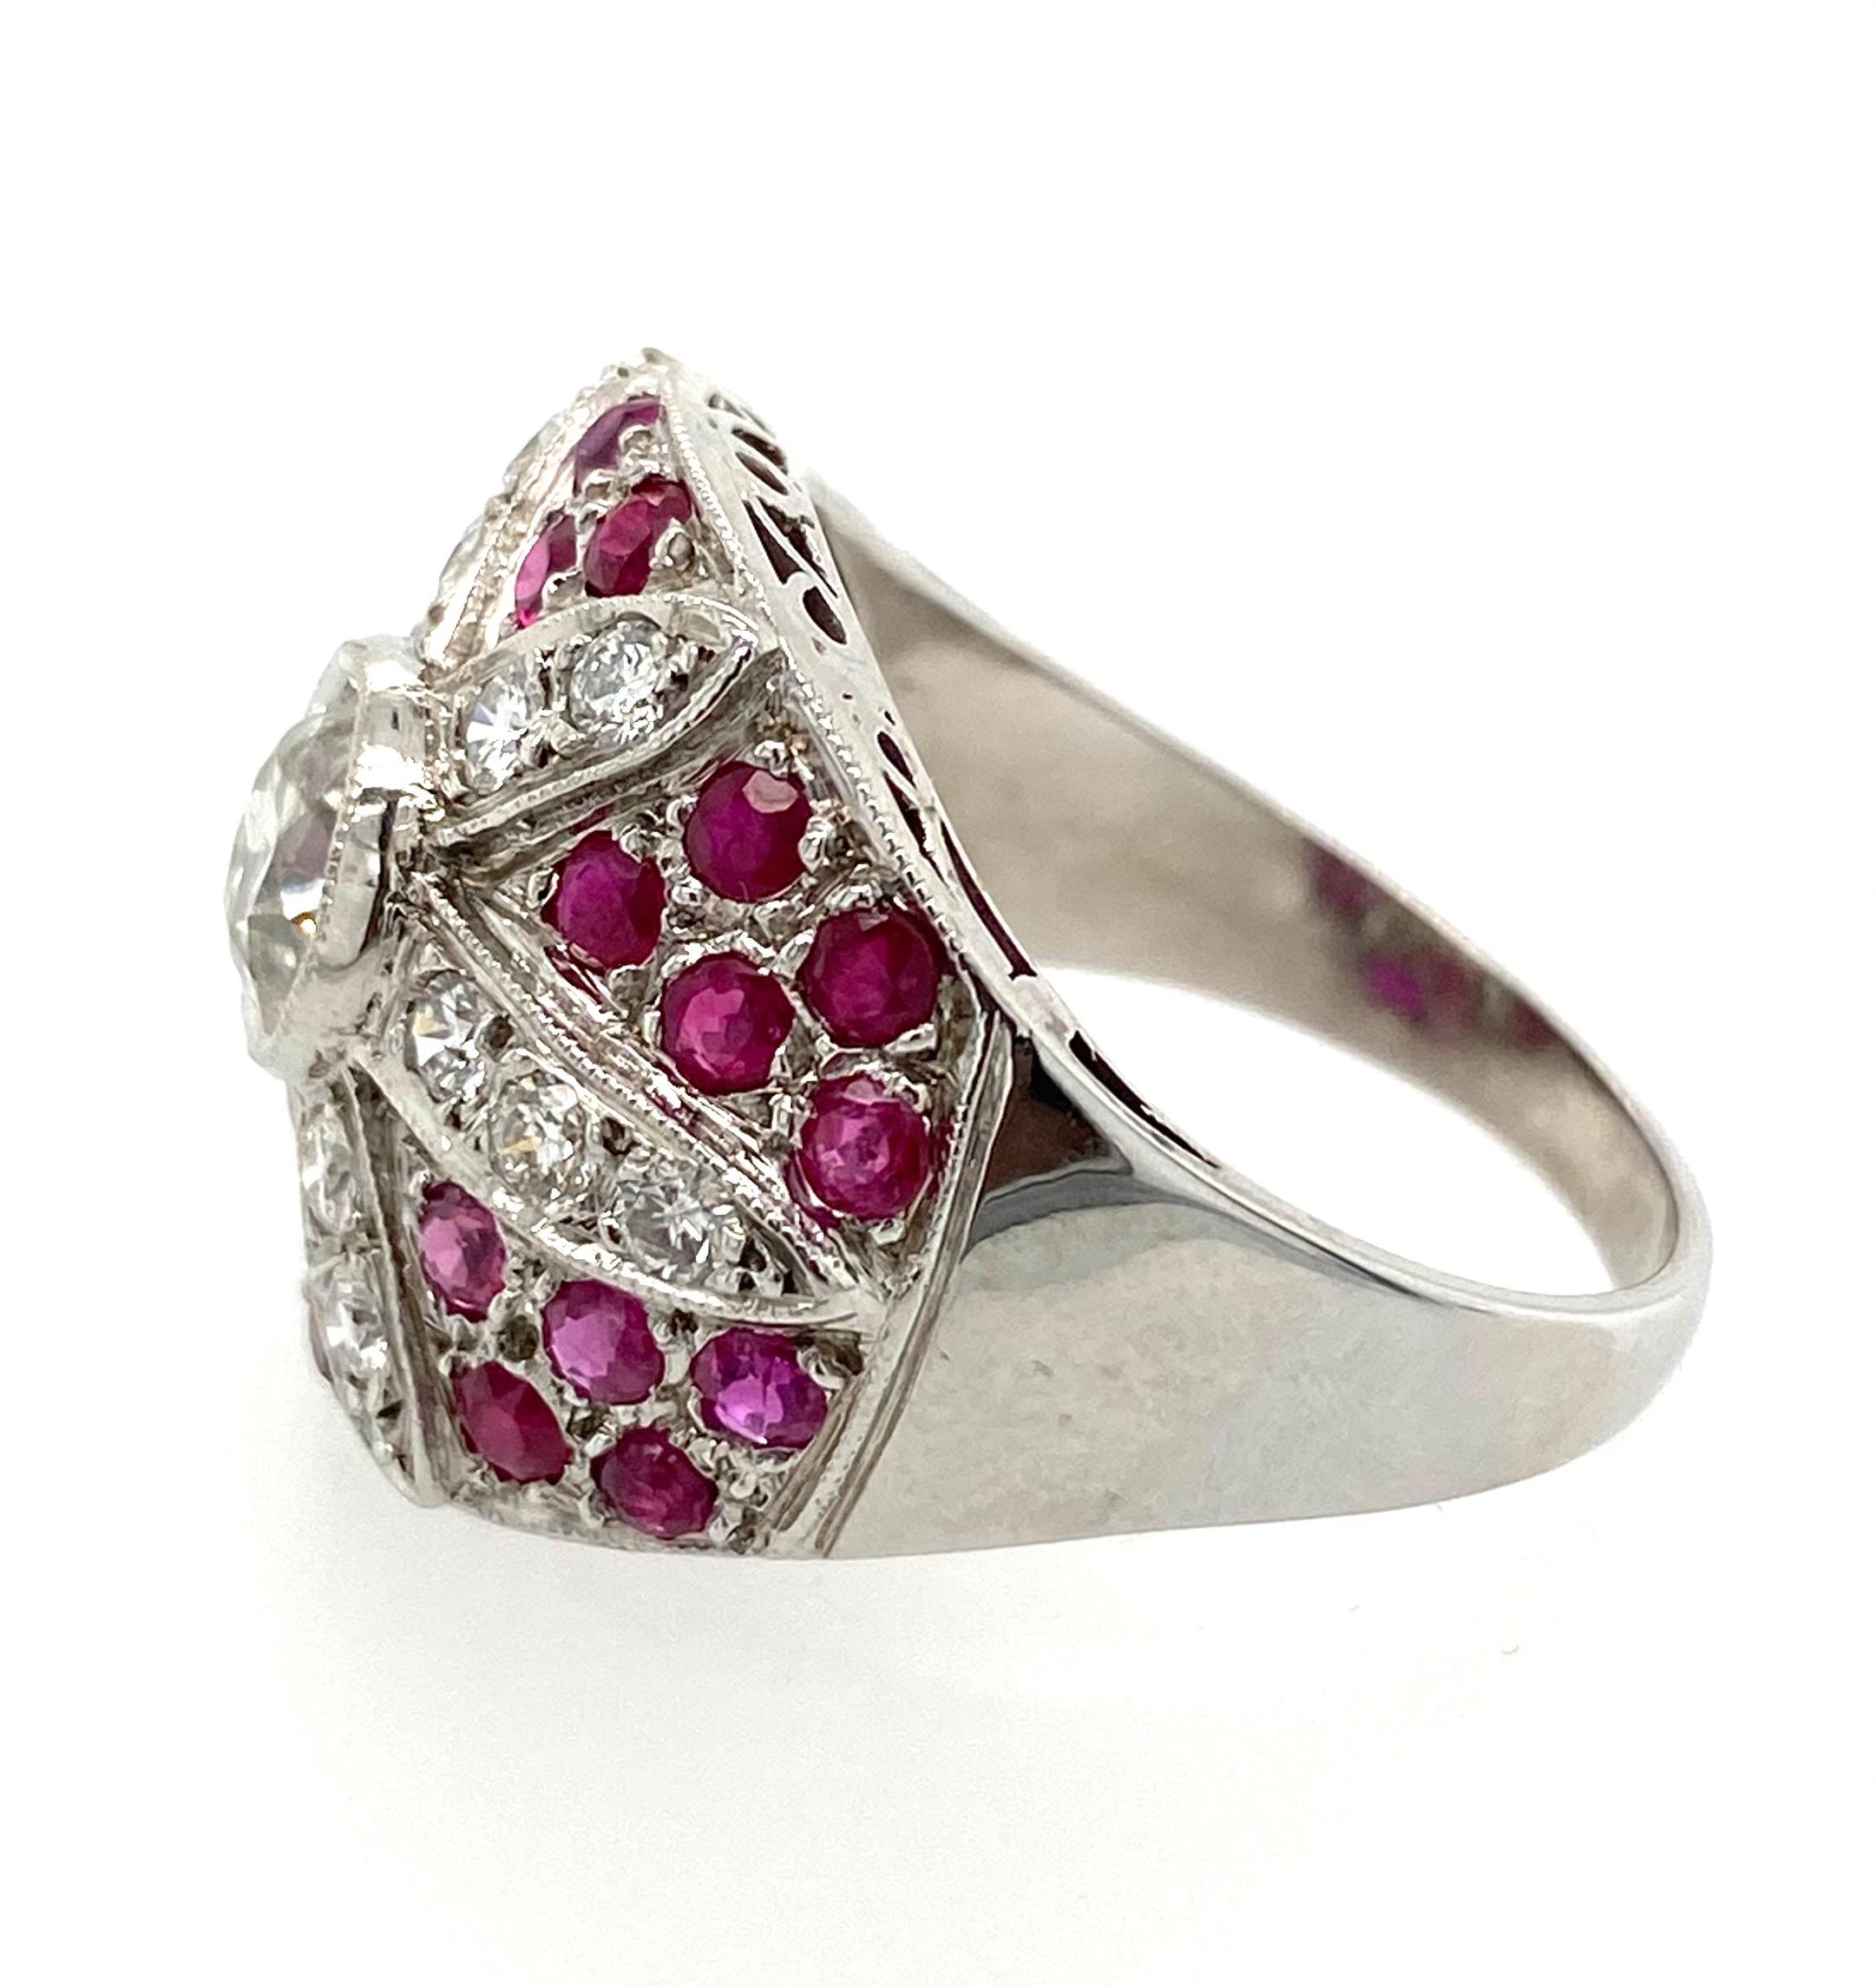 This Art Deco ring features a stunning 1.03 carat Old Mine Cut diamond at its center, which is surrounded by 1.15 carats of rich, red rubies. The platinum setting weighs 9.90 grams and is sized at 8, making it a substantial and impressive piece.The